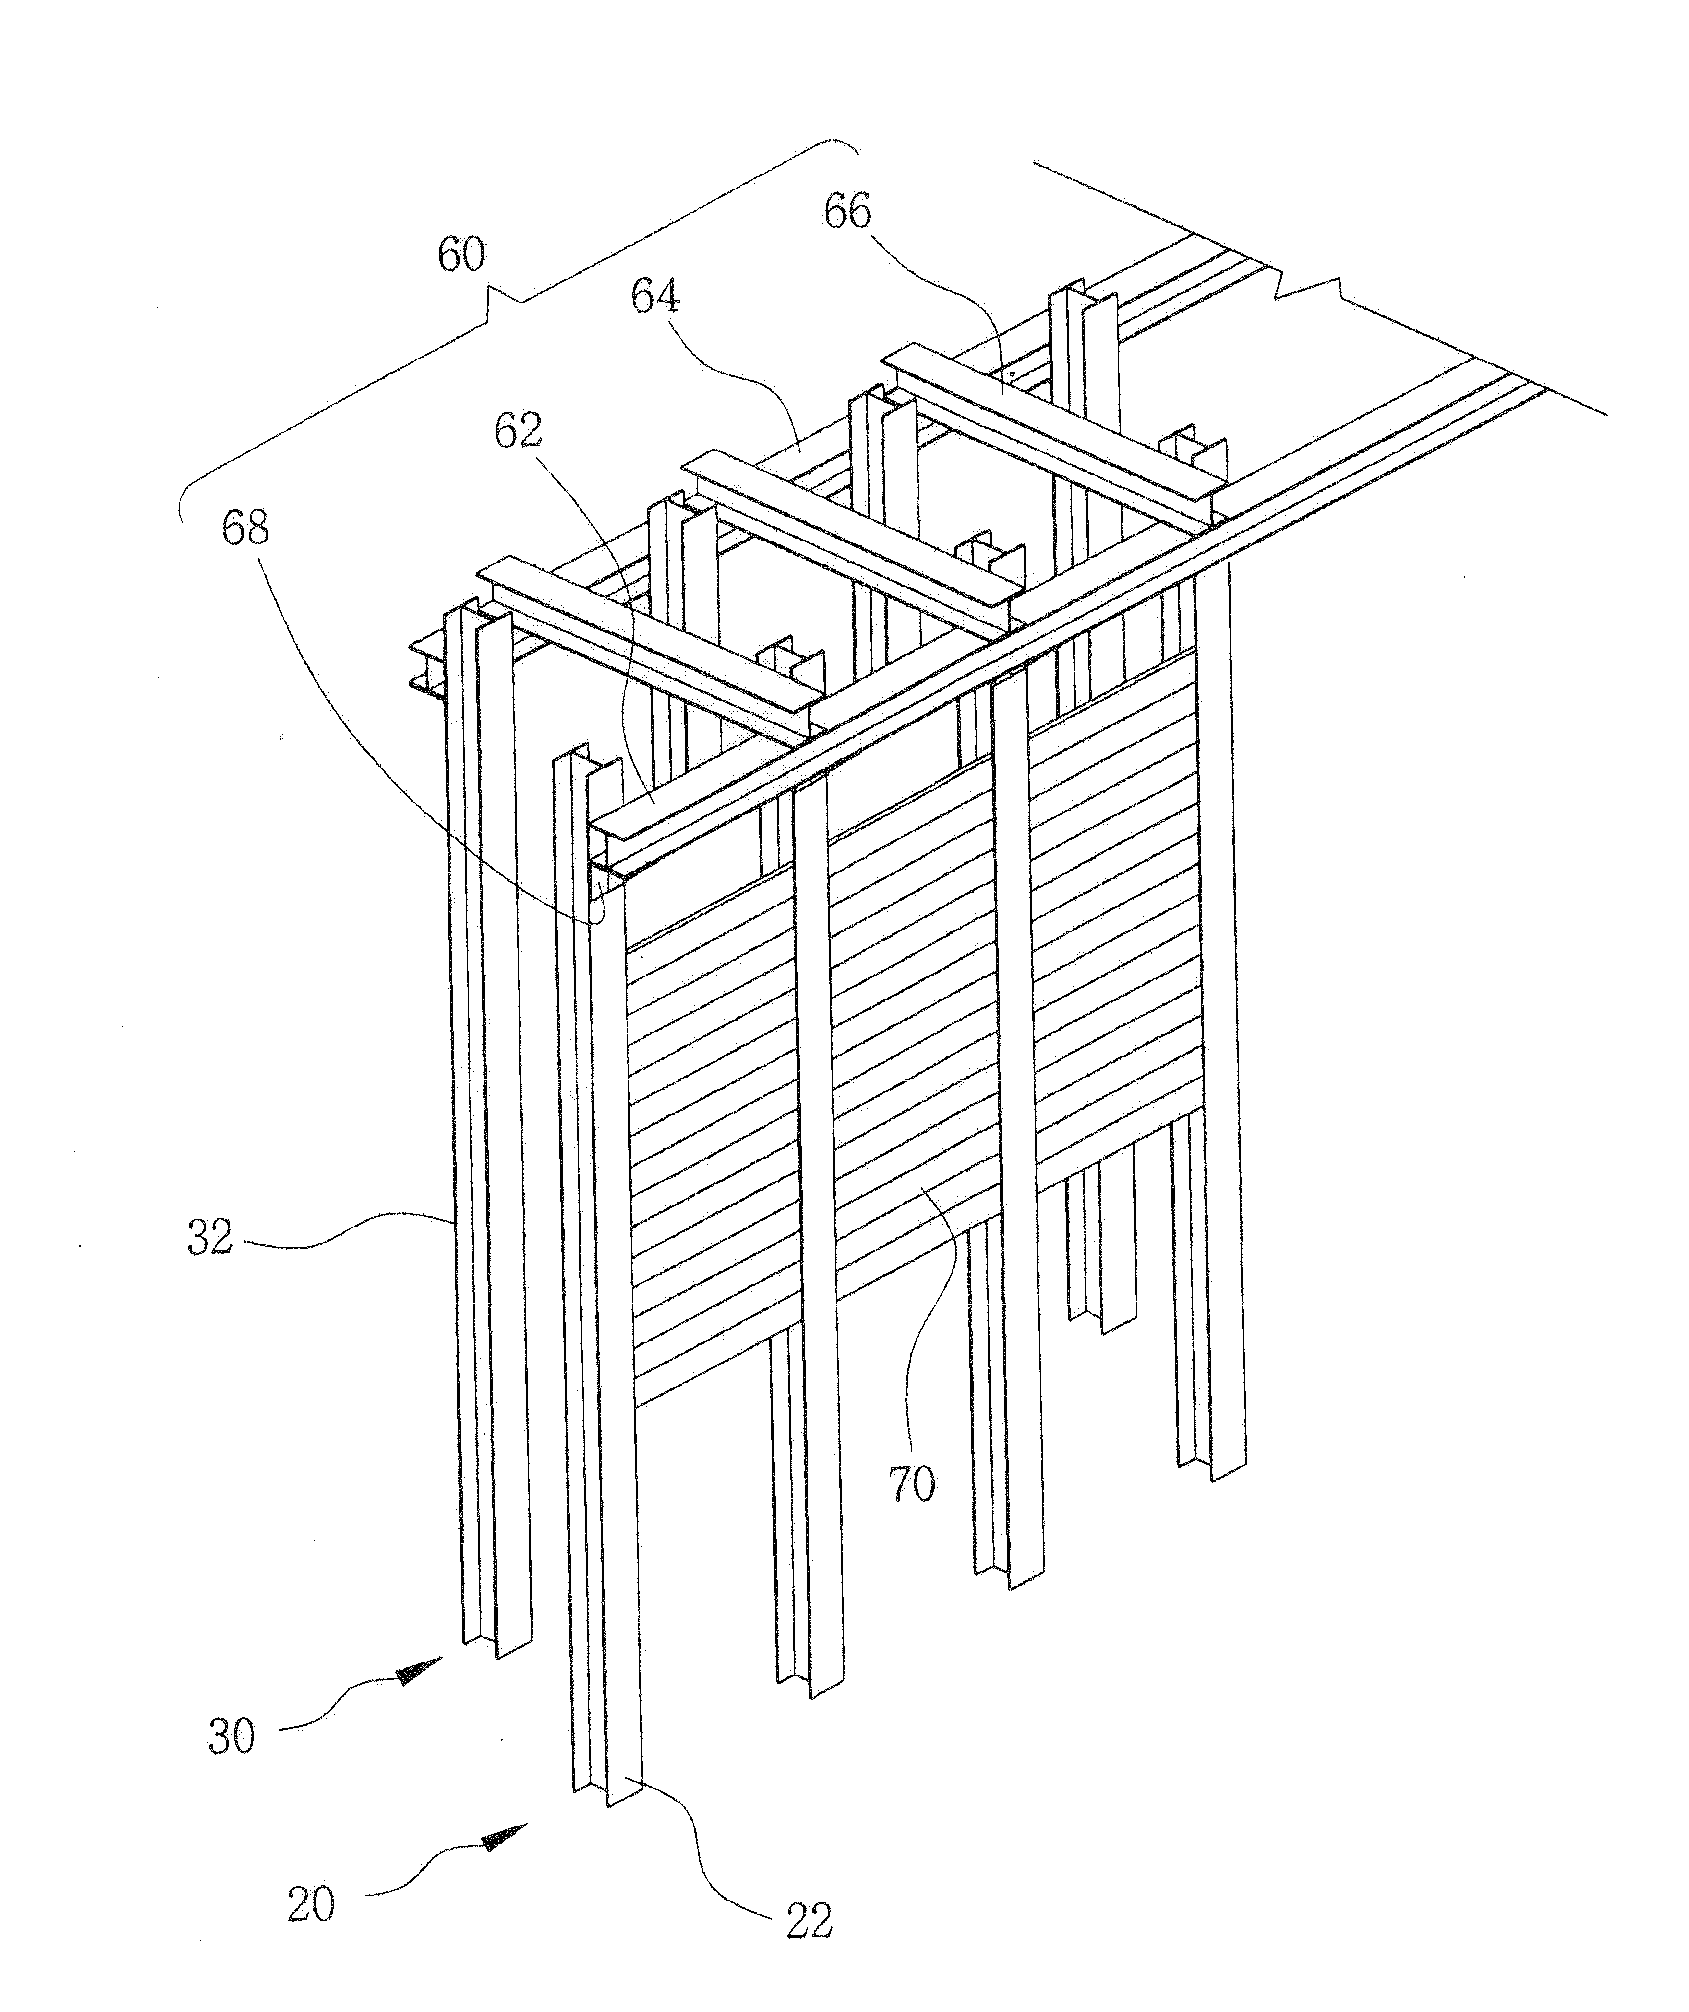 Method for constructing a chair-type, self-supported earth retaining wall